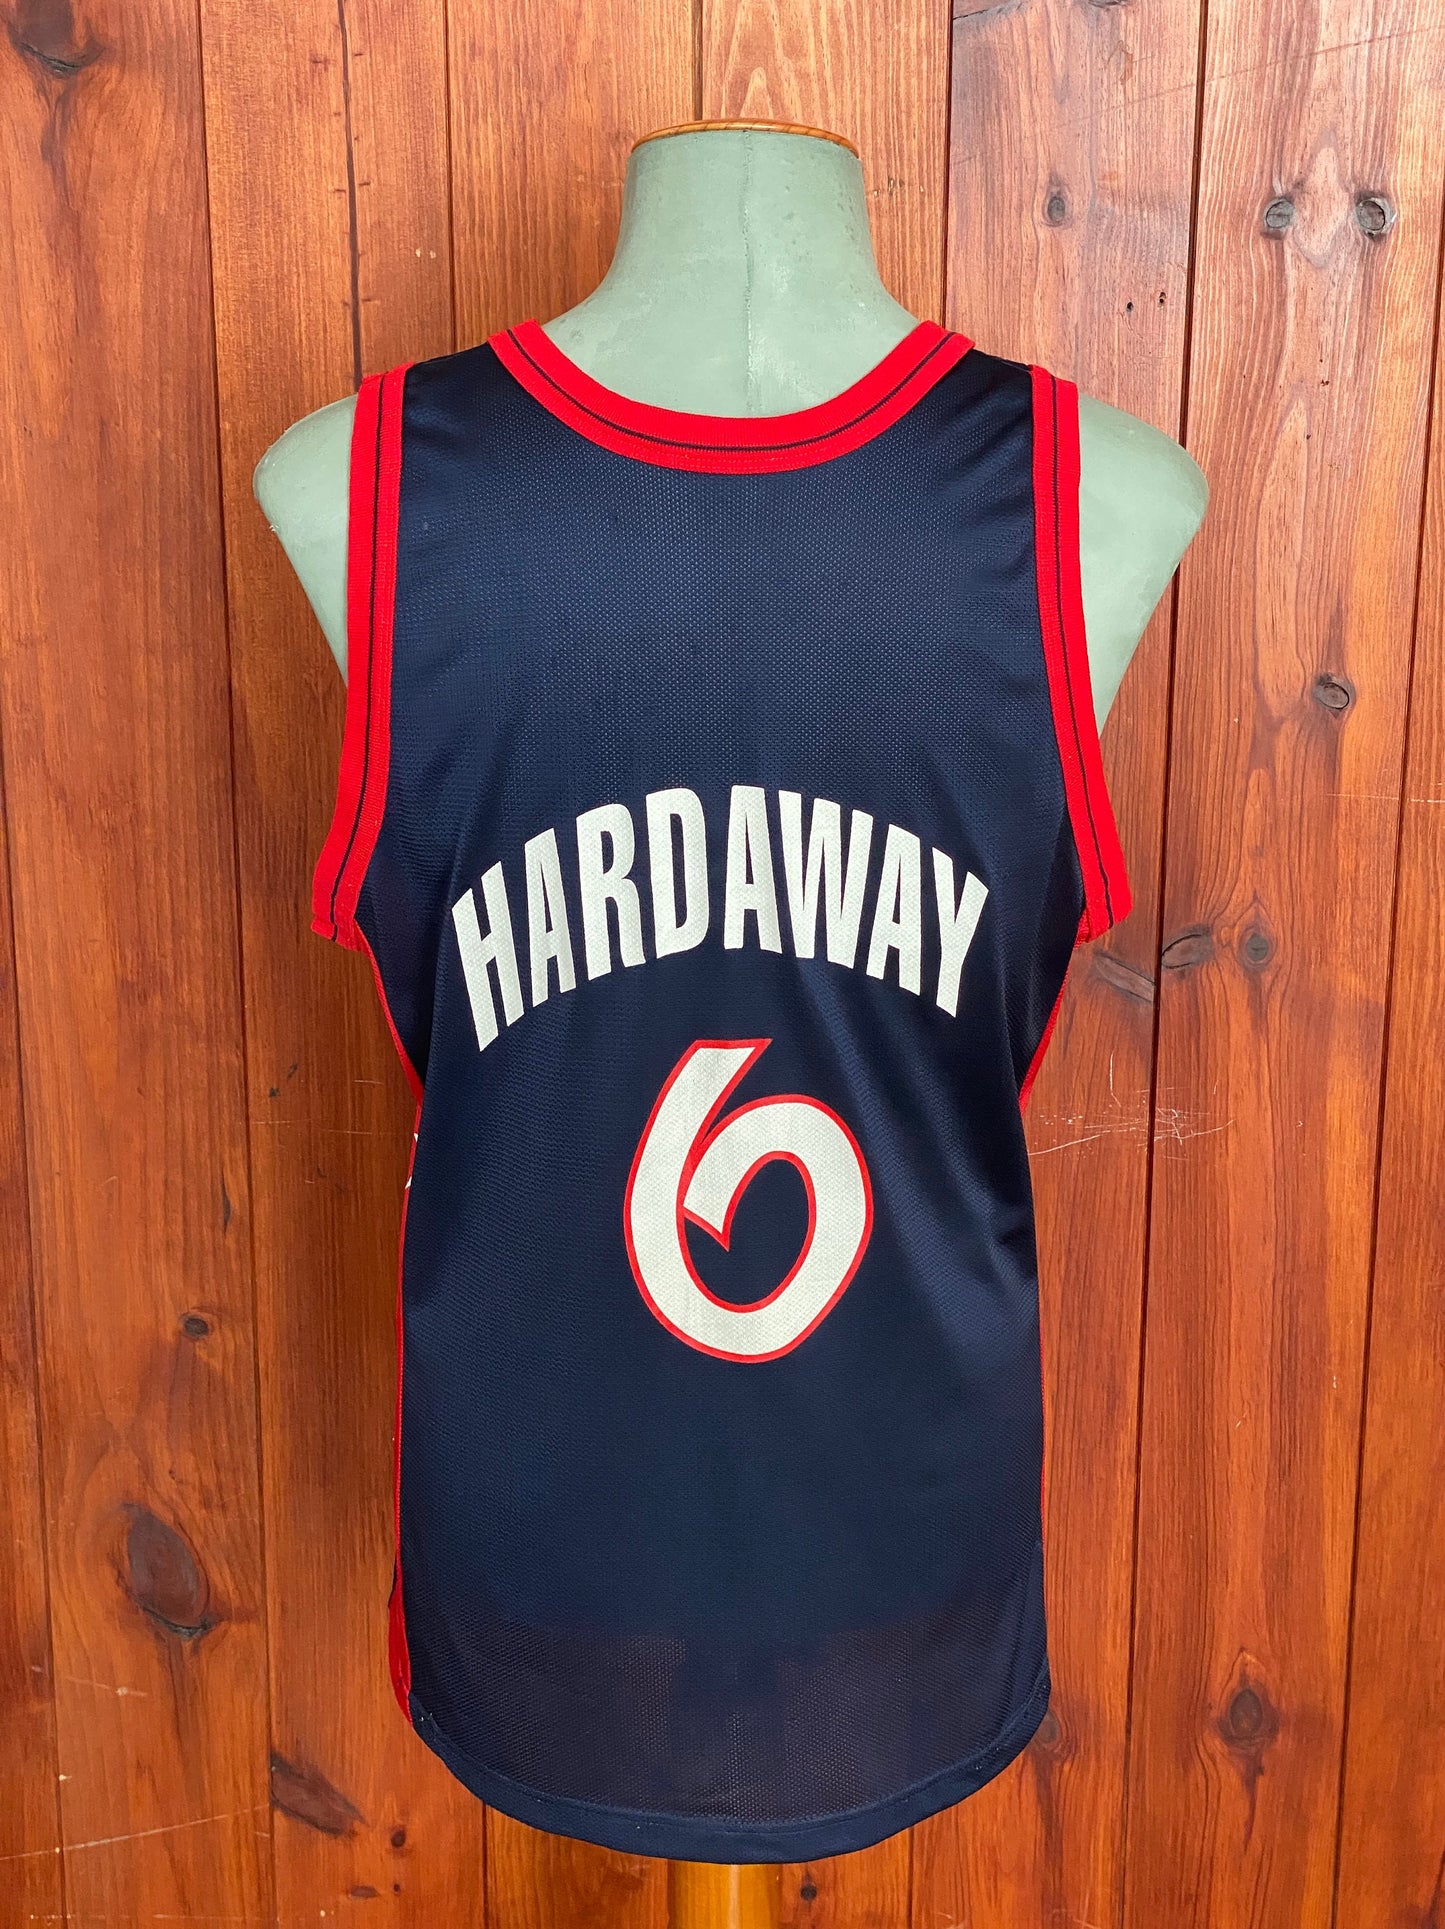 Vintage 90s USA Team Hardaway #6 NBA jersey, size 44 - back view. Proudly made in USA by Champion.